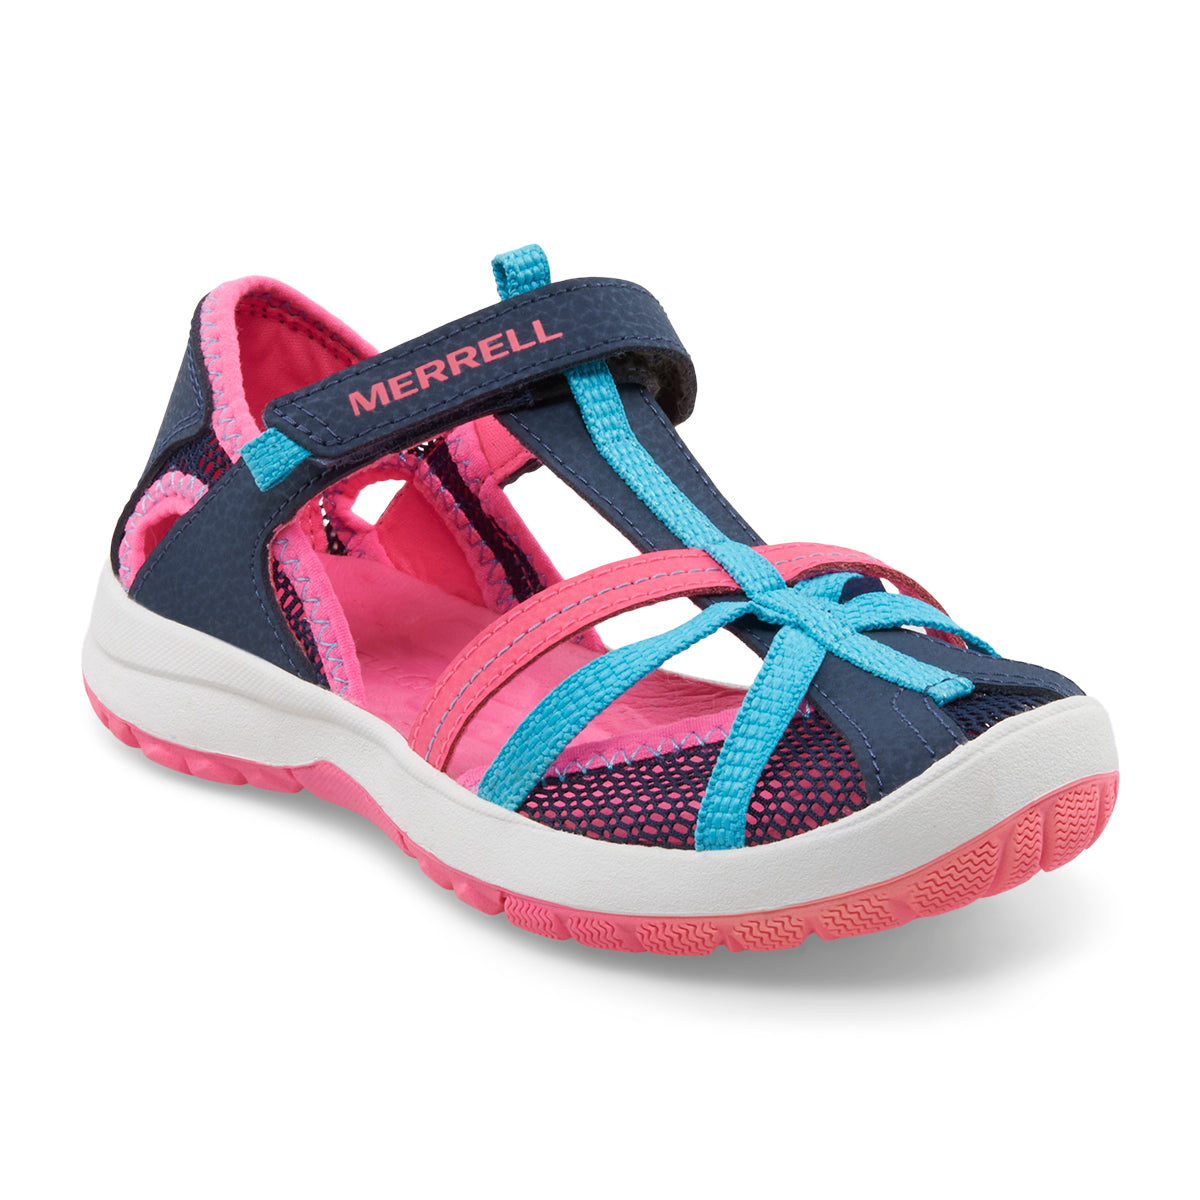 Dragonfly Sandal Navy/Turquoise/Pink